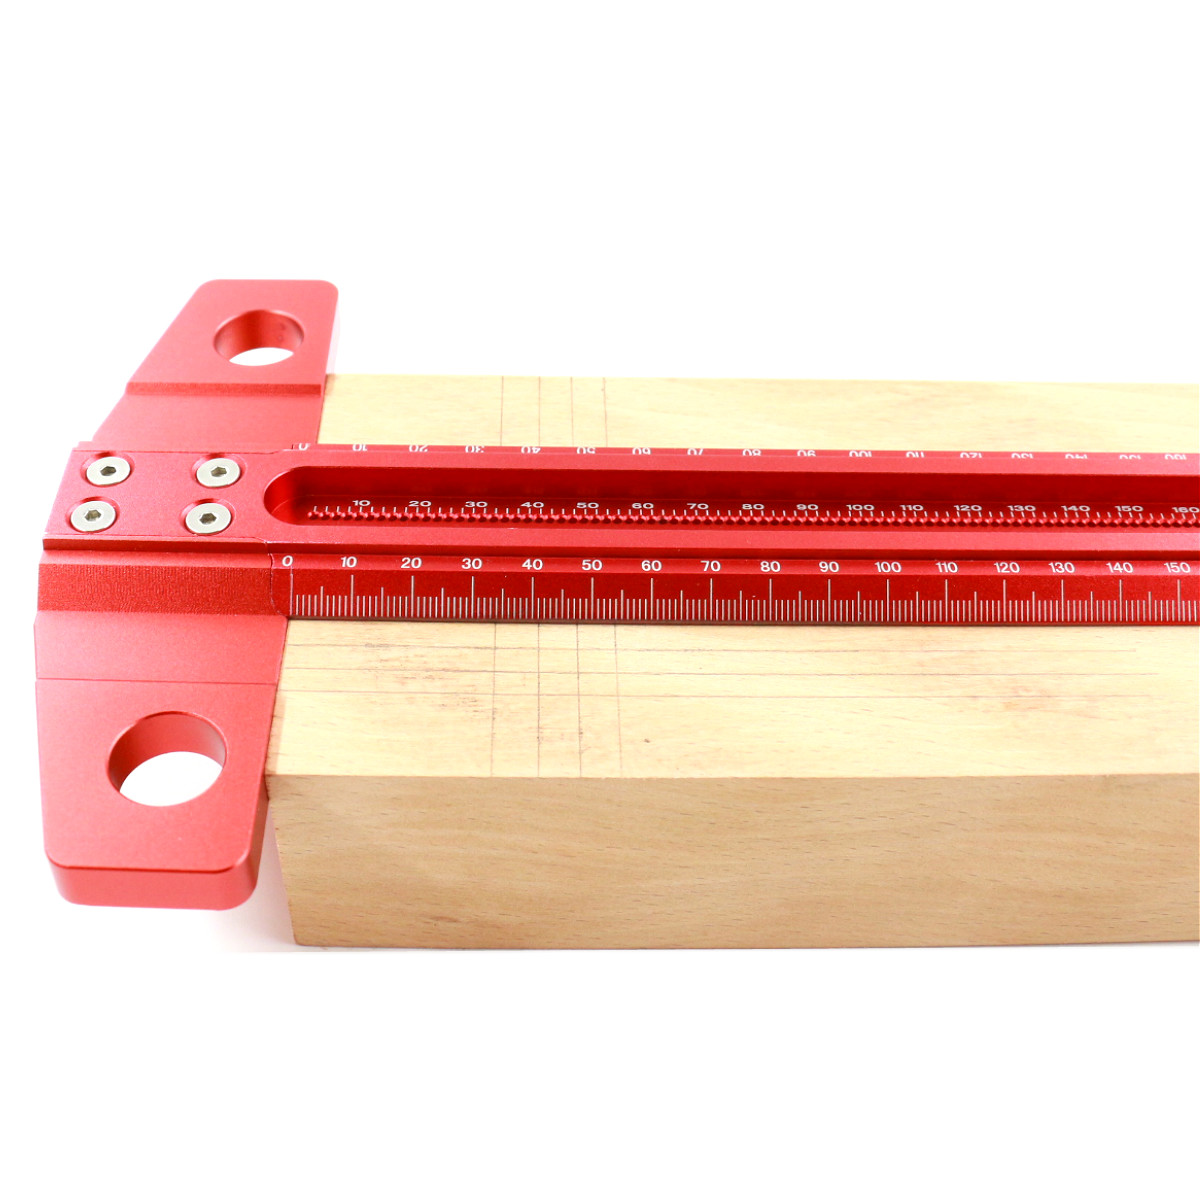 Drillpro-300400500600mm-Woodworking-Line-Scriber-T-type-Ruler-1mm-Hole-Crossed-Ruler-Aluminum-Alloy--1772764-8